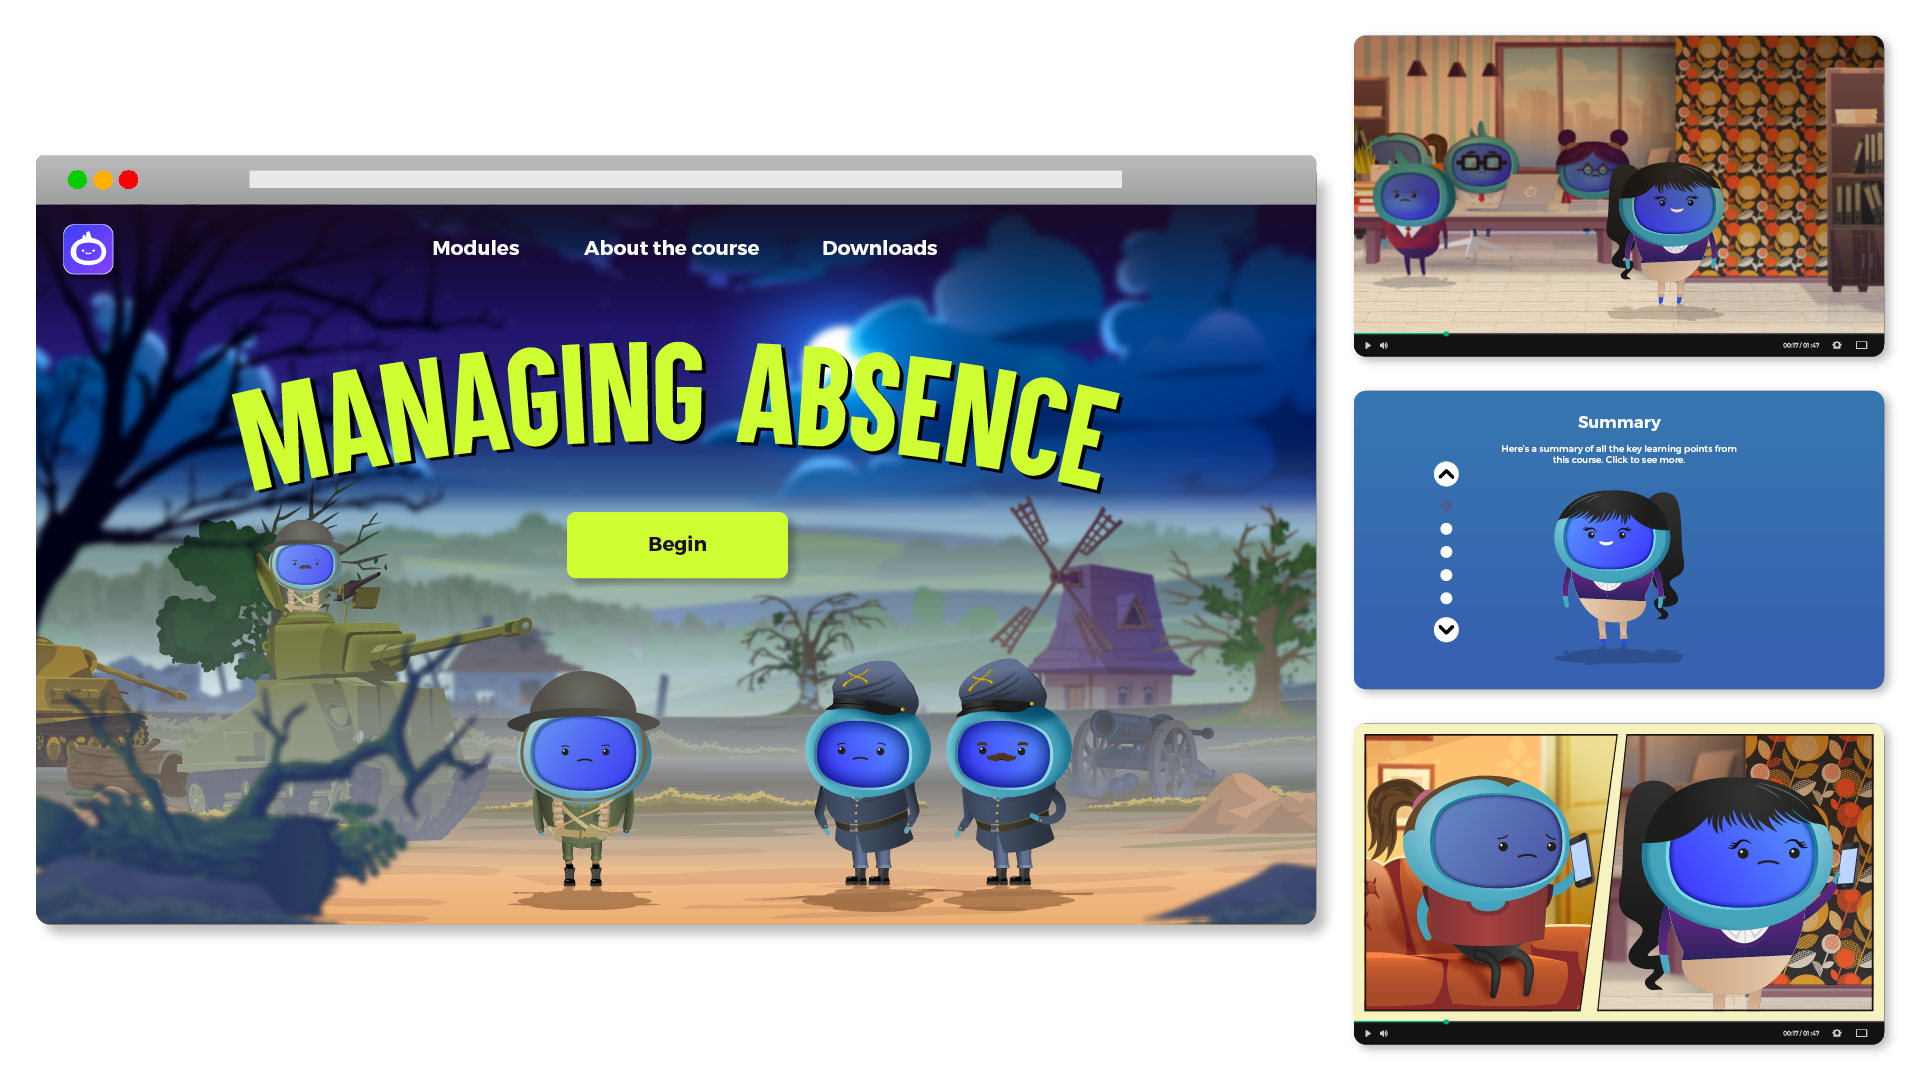 iAM00153 – Managing Absence – Landing Page